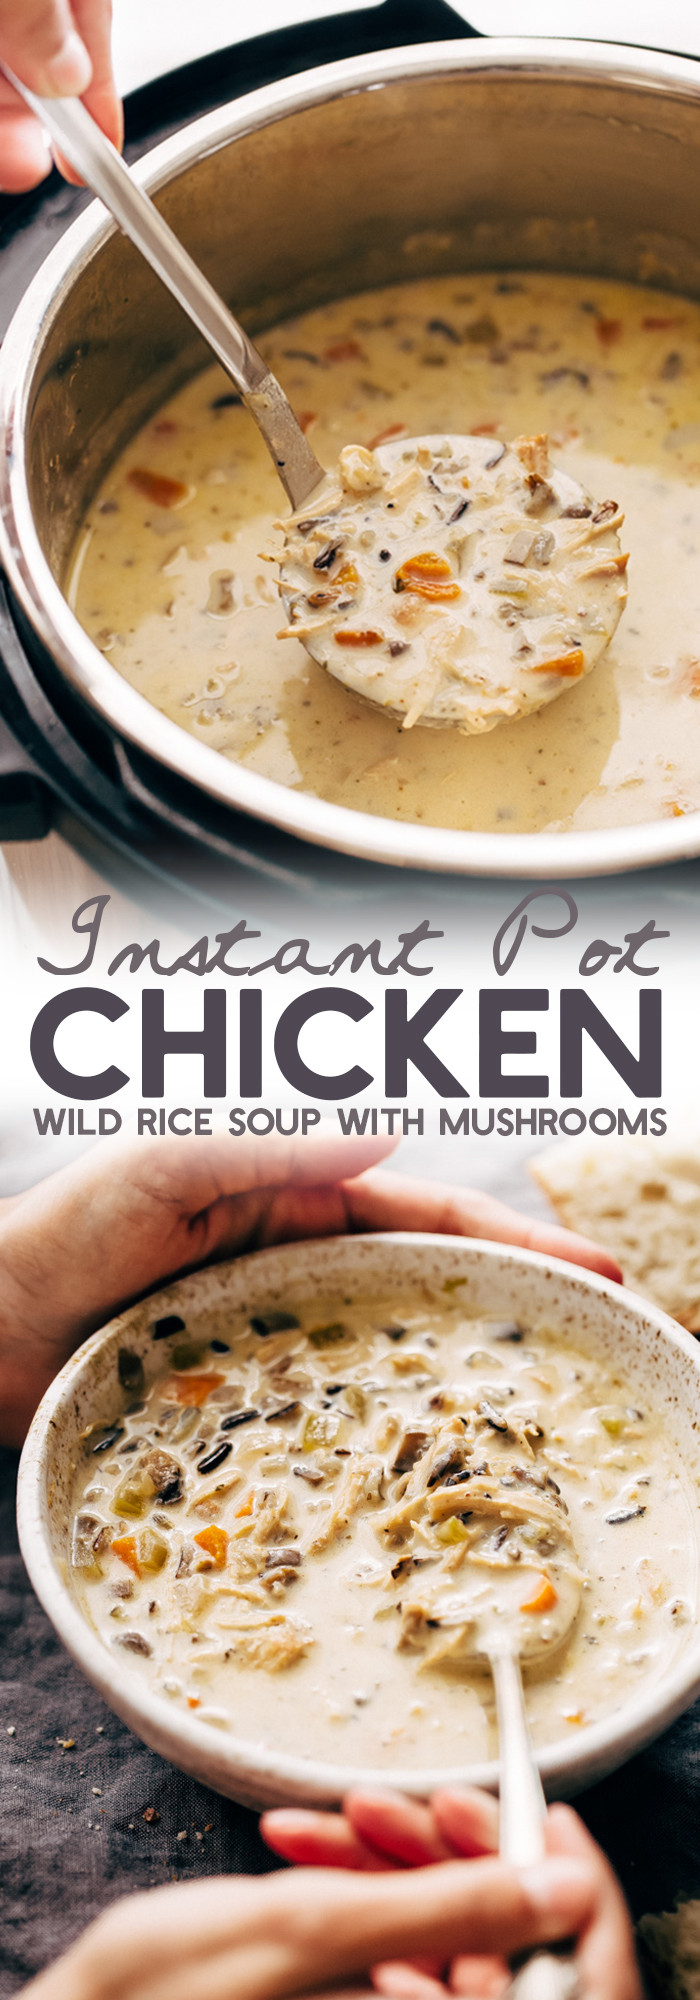 Chicken And Wild Rice Soup Instant Pot
 Instant Pot Chicken Wild Rice Soup Recipe